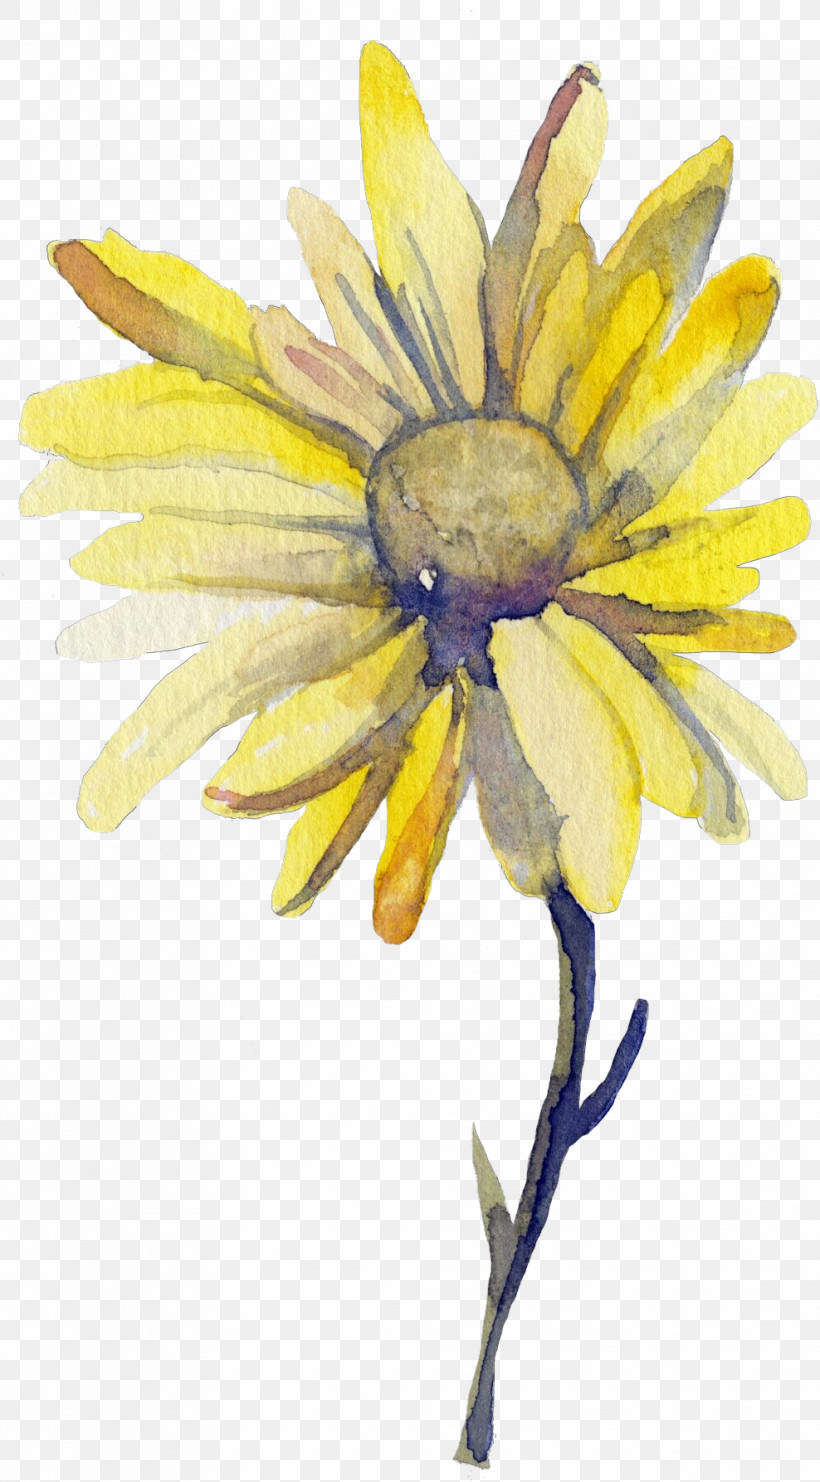 Sunflower, PNG, 988x1786px, Flower, Blackeyed Susan, Petal, Plant, Sunflower Download Free